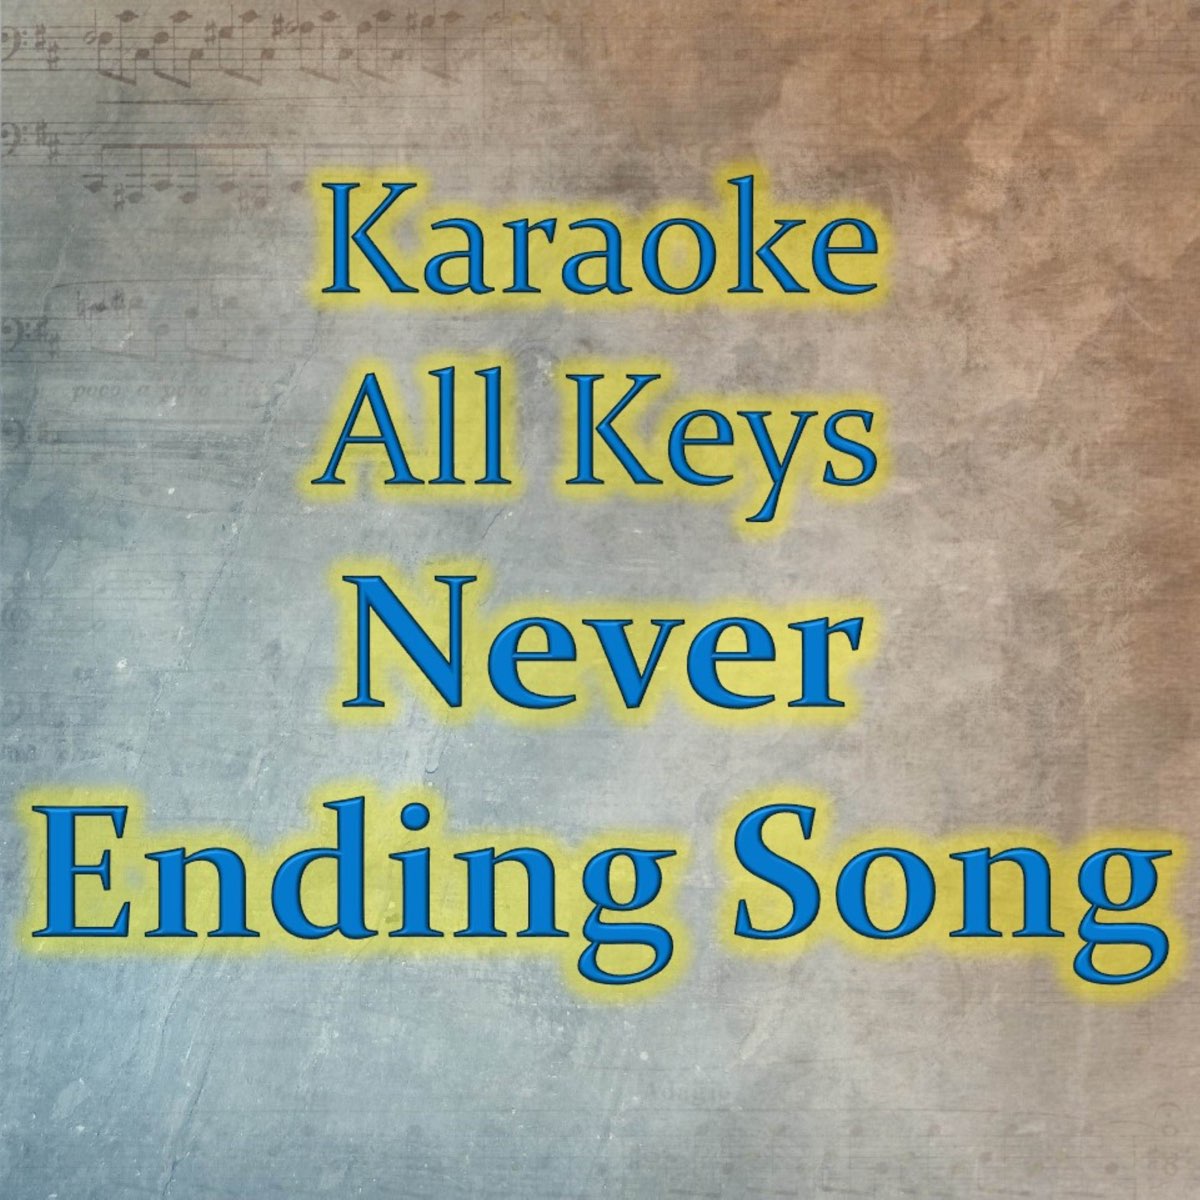 How To Get Every Ending In The Karaoke